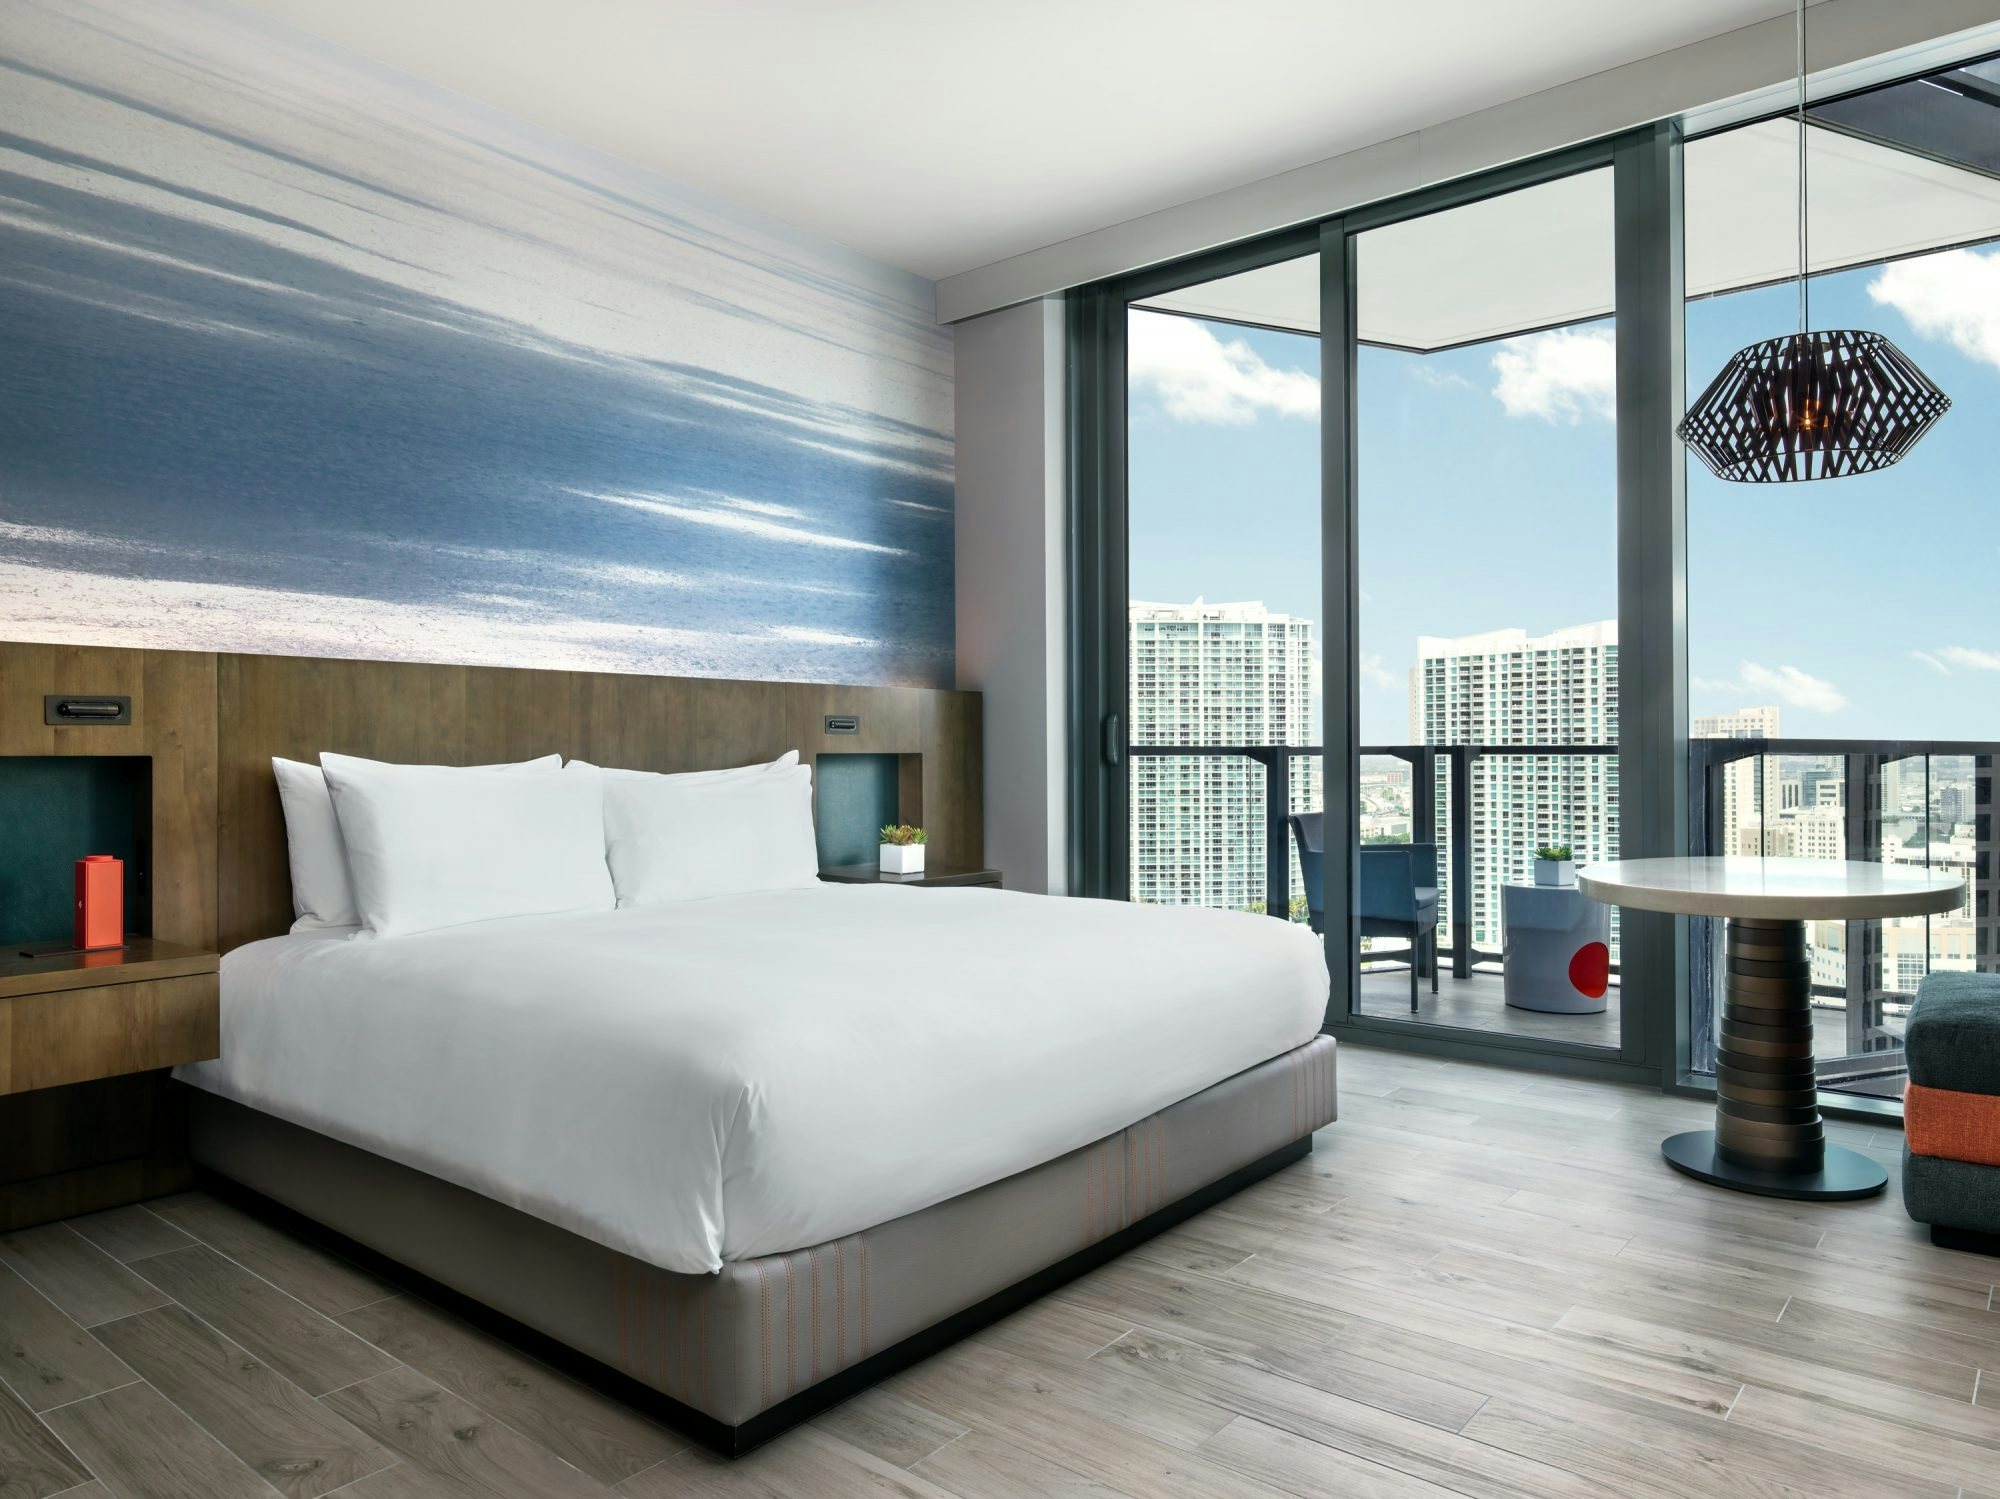 EAST Miami's hotel guests are just minutes away from shopping and dining in Swire's adjacent Brickell complex. (Courtesy Photo)